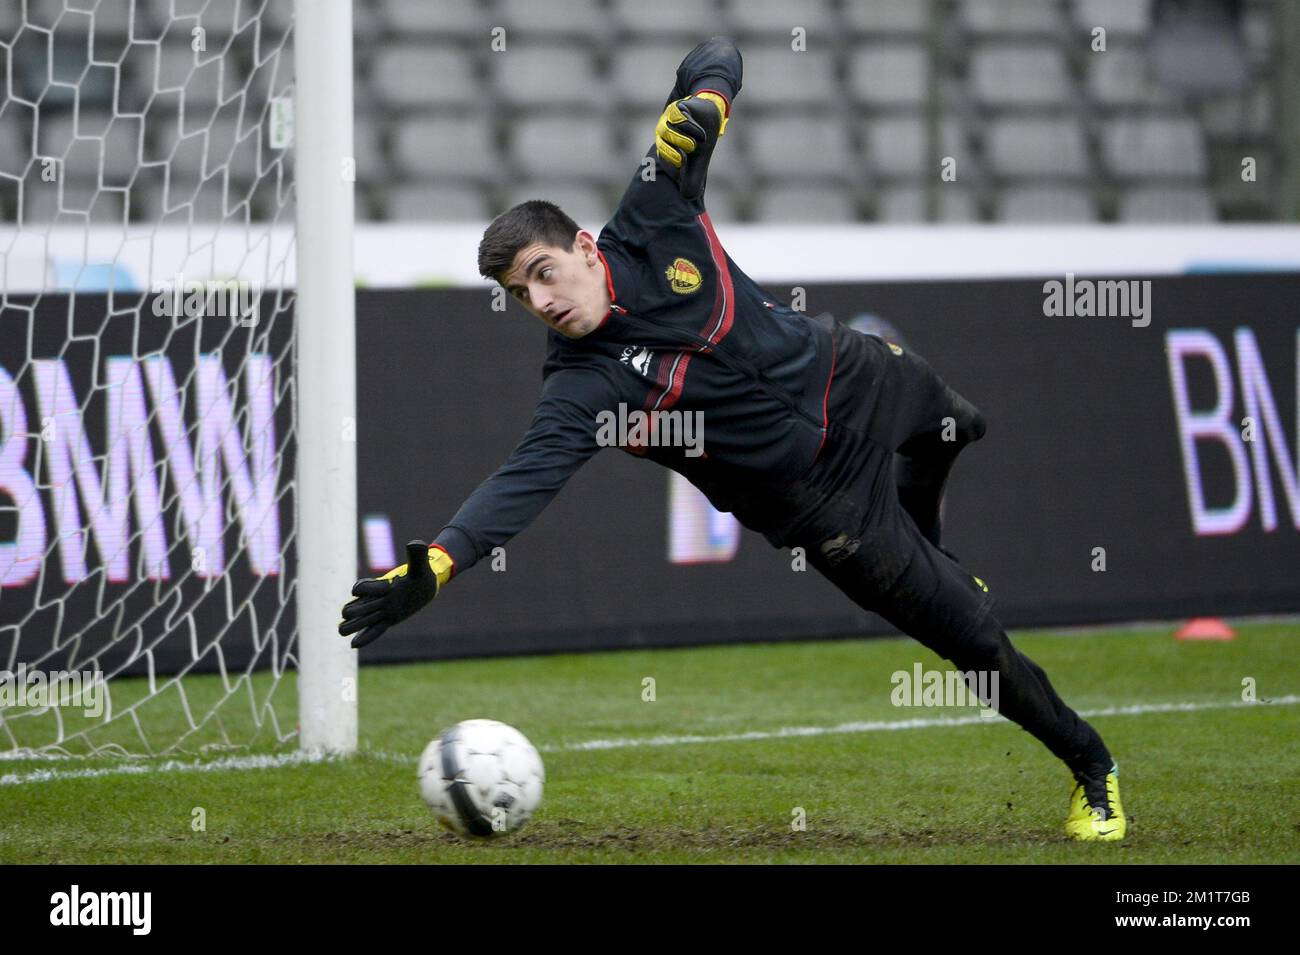 20131118 - BRUSSELS, BELGIUM: Belgium's goalkeeper Thibaut Courtois pictured during a training session of Belgian national soccer team Red Devils in Brussels, on Monday 18 November 2013. Last Thursday they played 0-2 against Colombia and tomorrow Red Devils play Japan in a friendly game. BELGA PHOTO DIRK WAEM Stock Photo